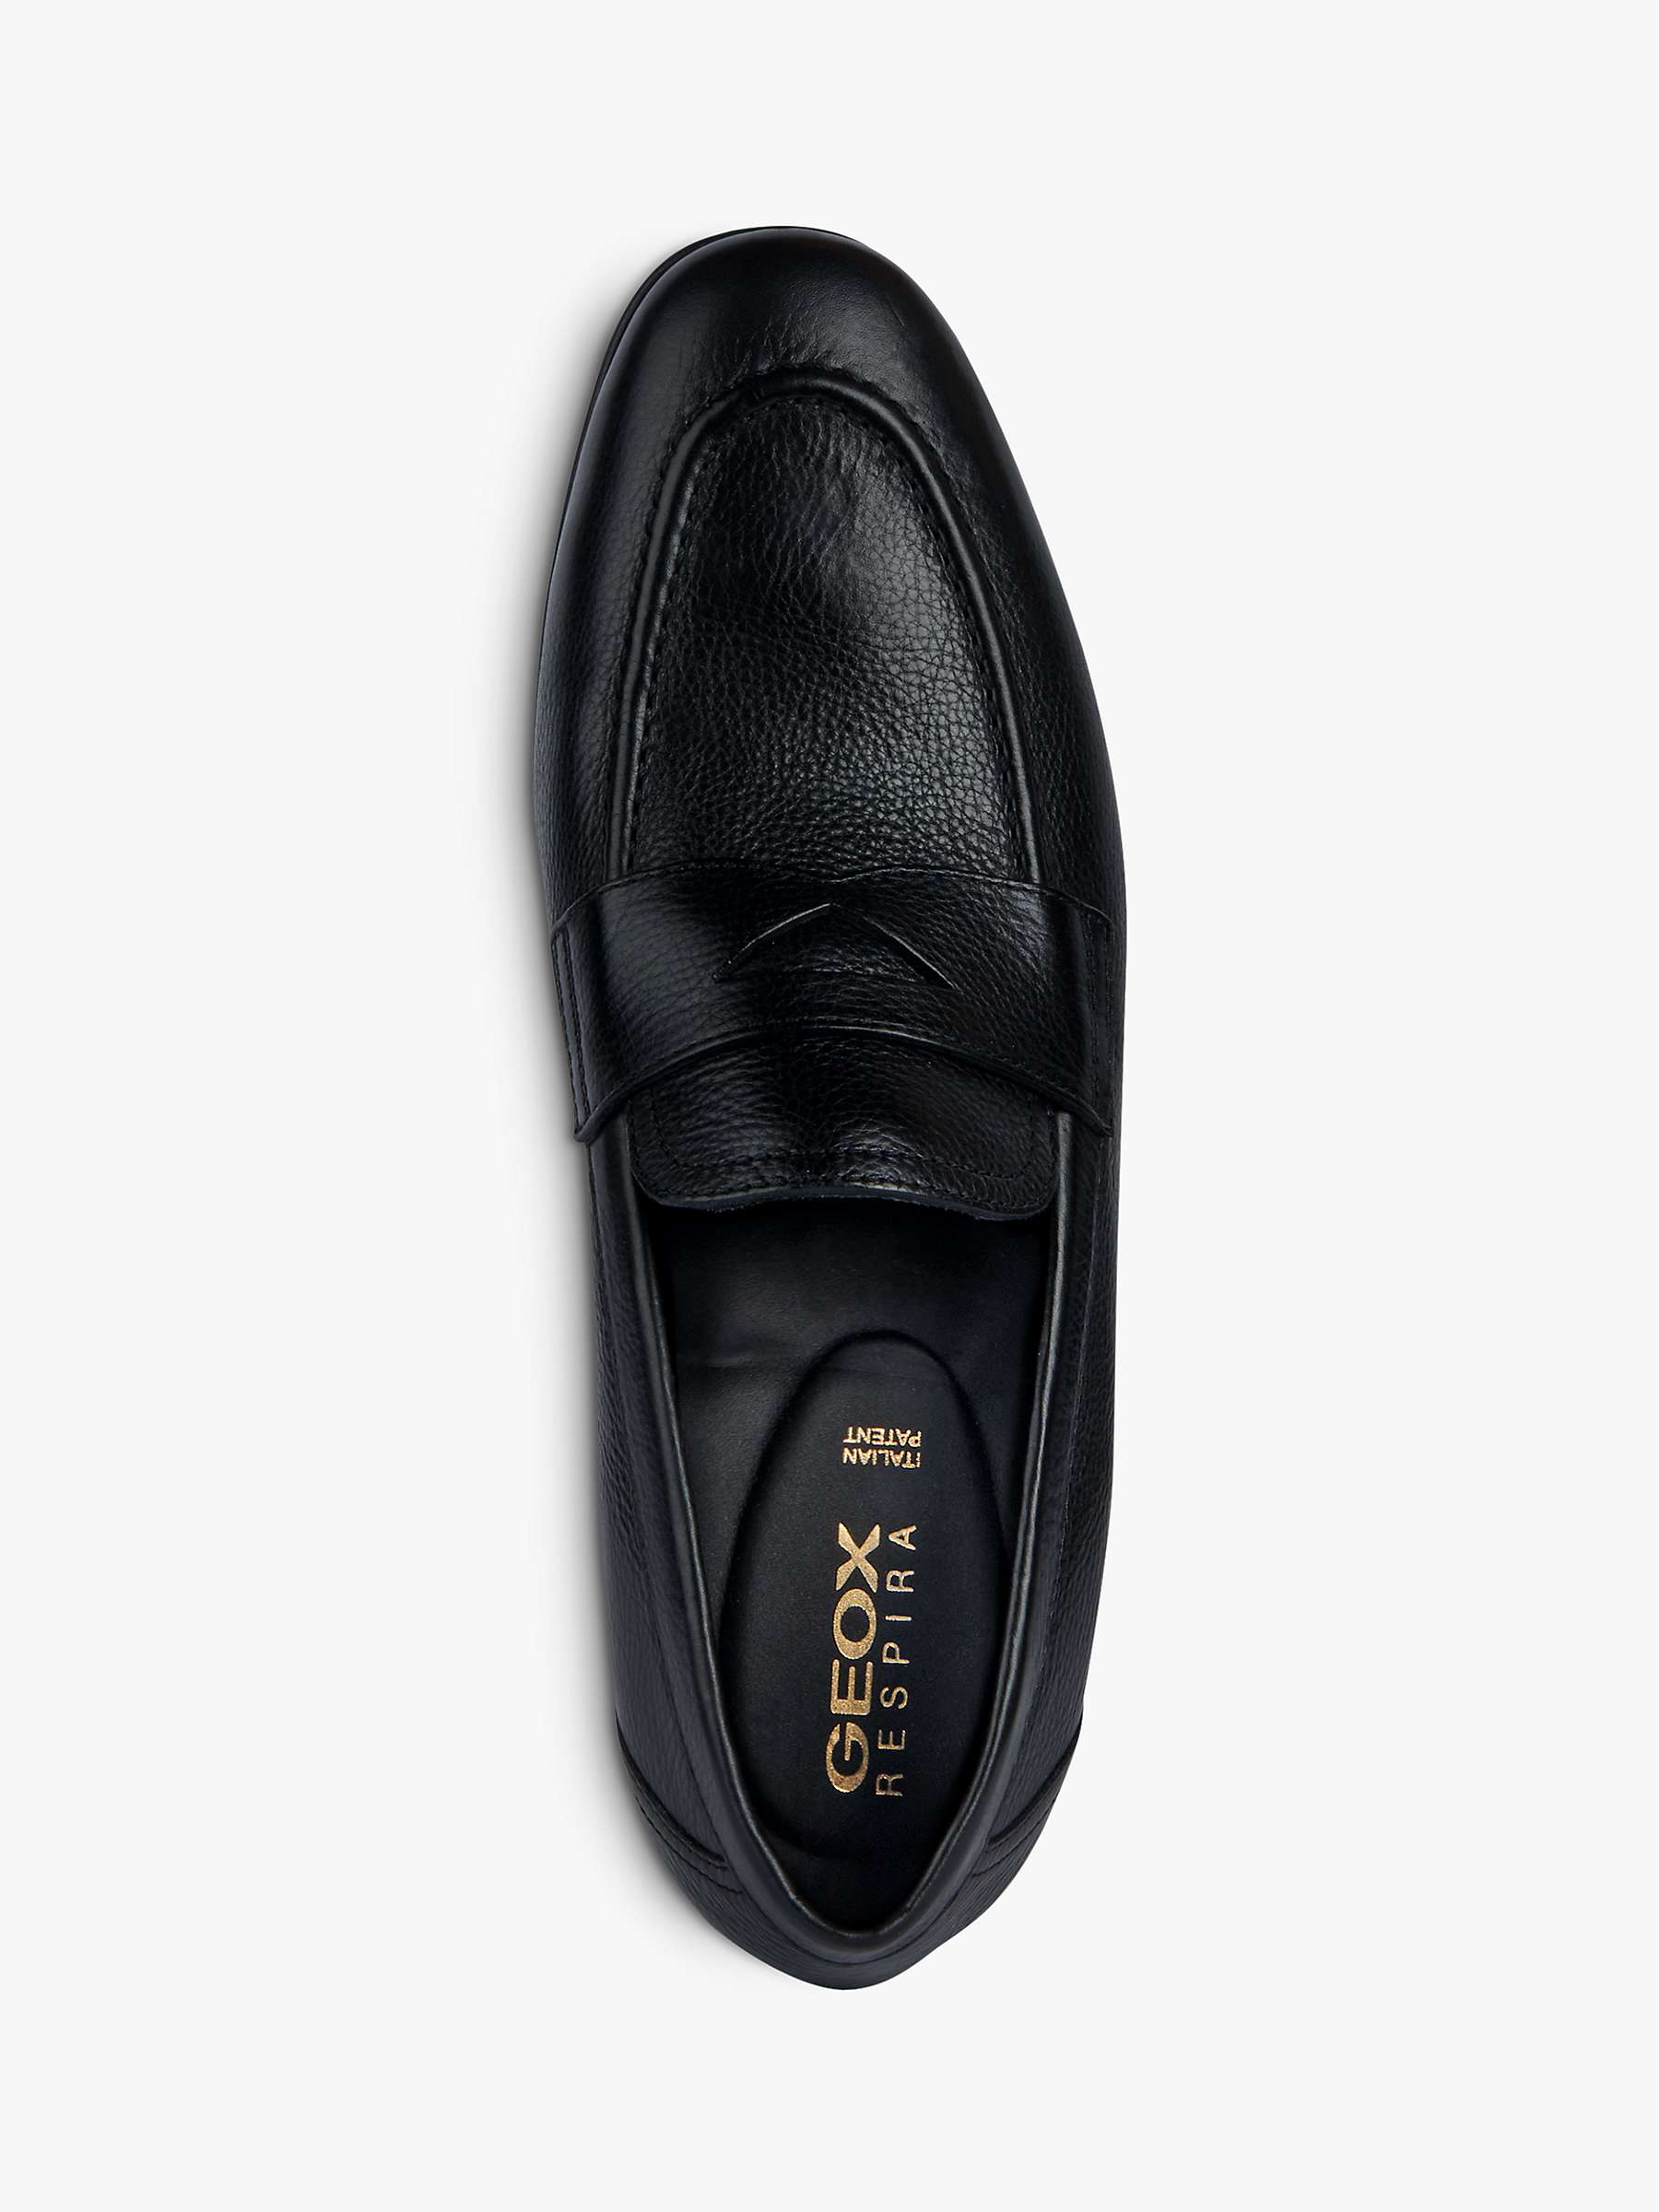 Buy Geox Sapienza Classic Loafers Online at johnlewis.com